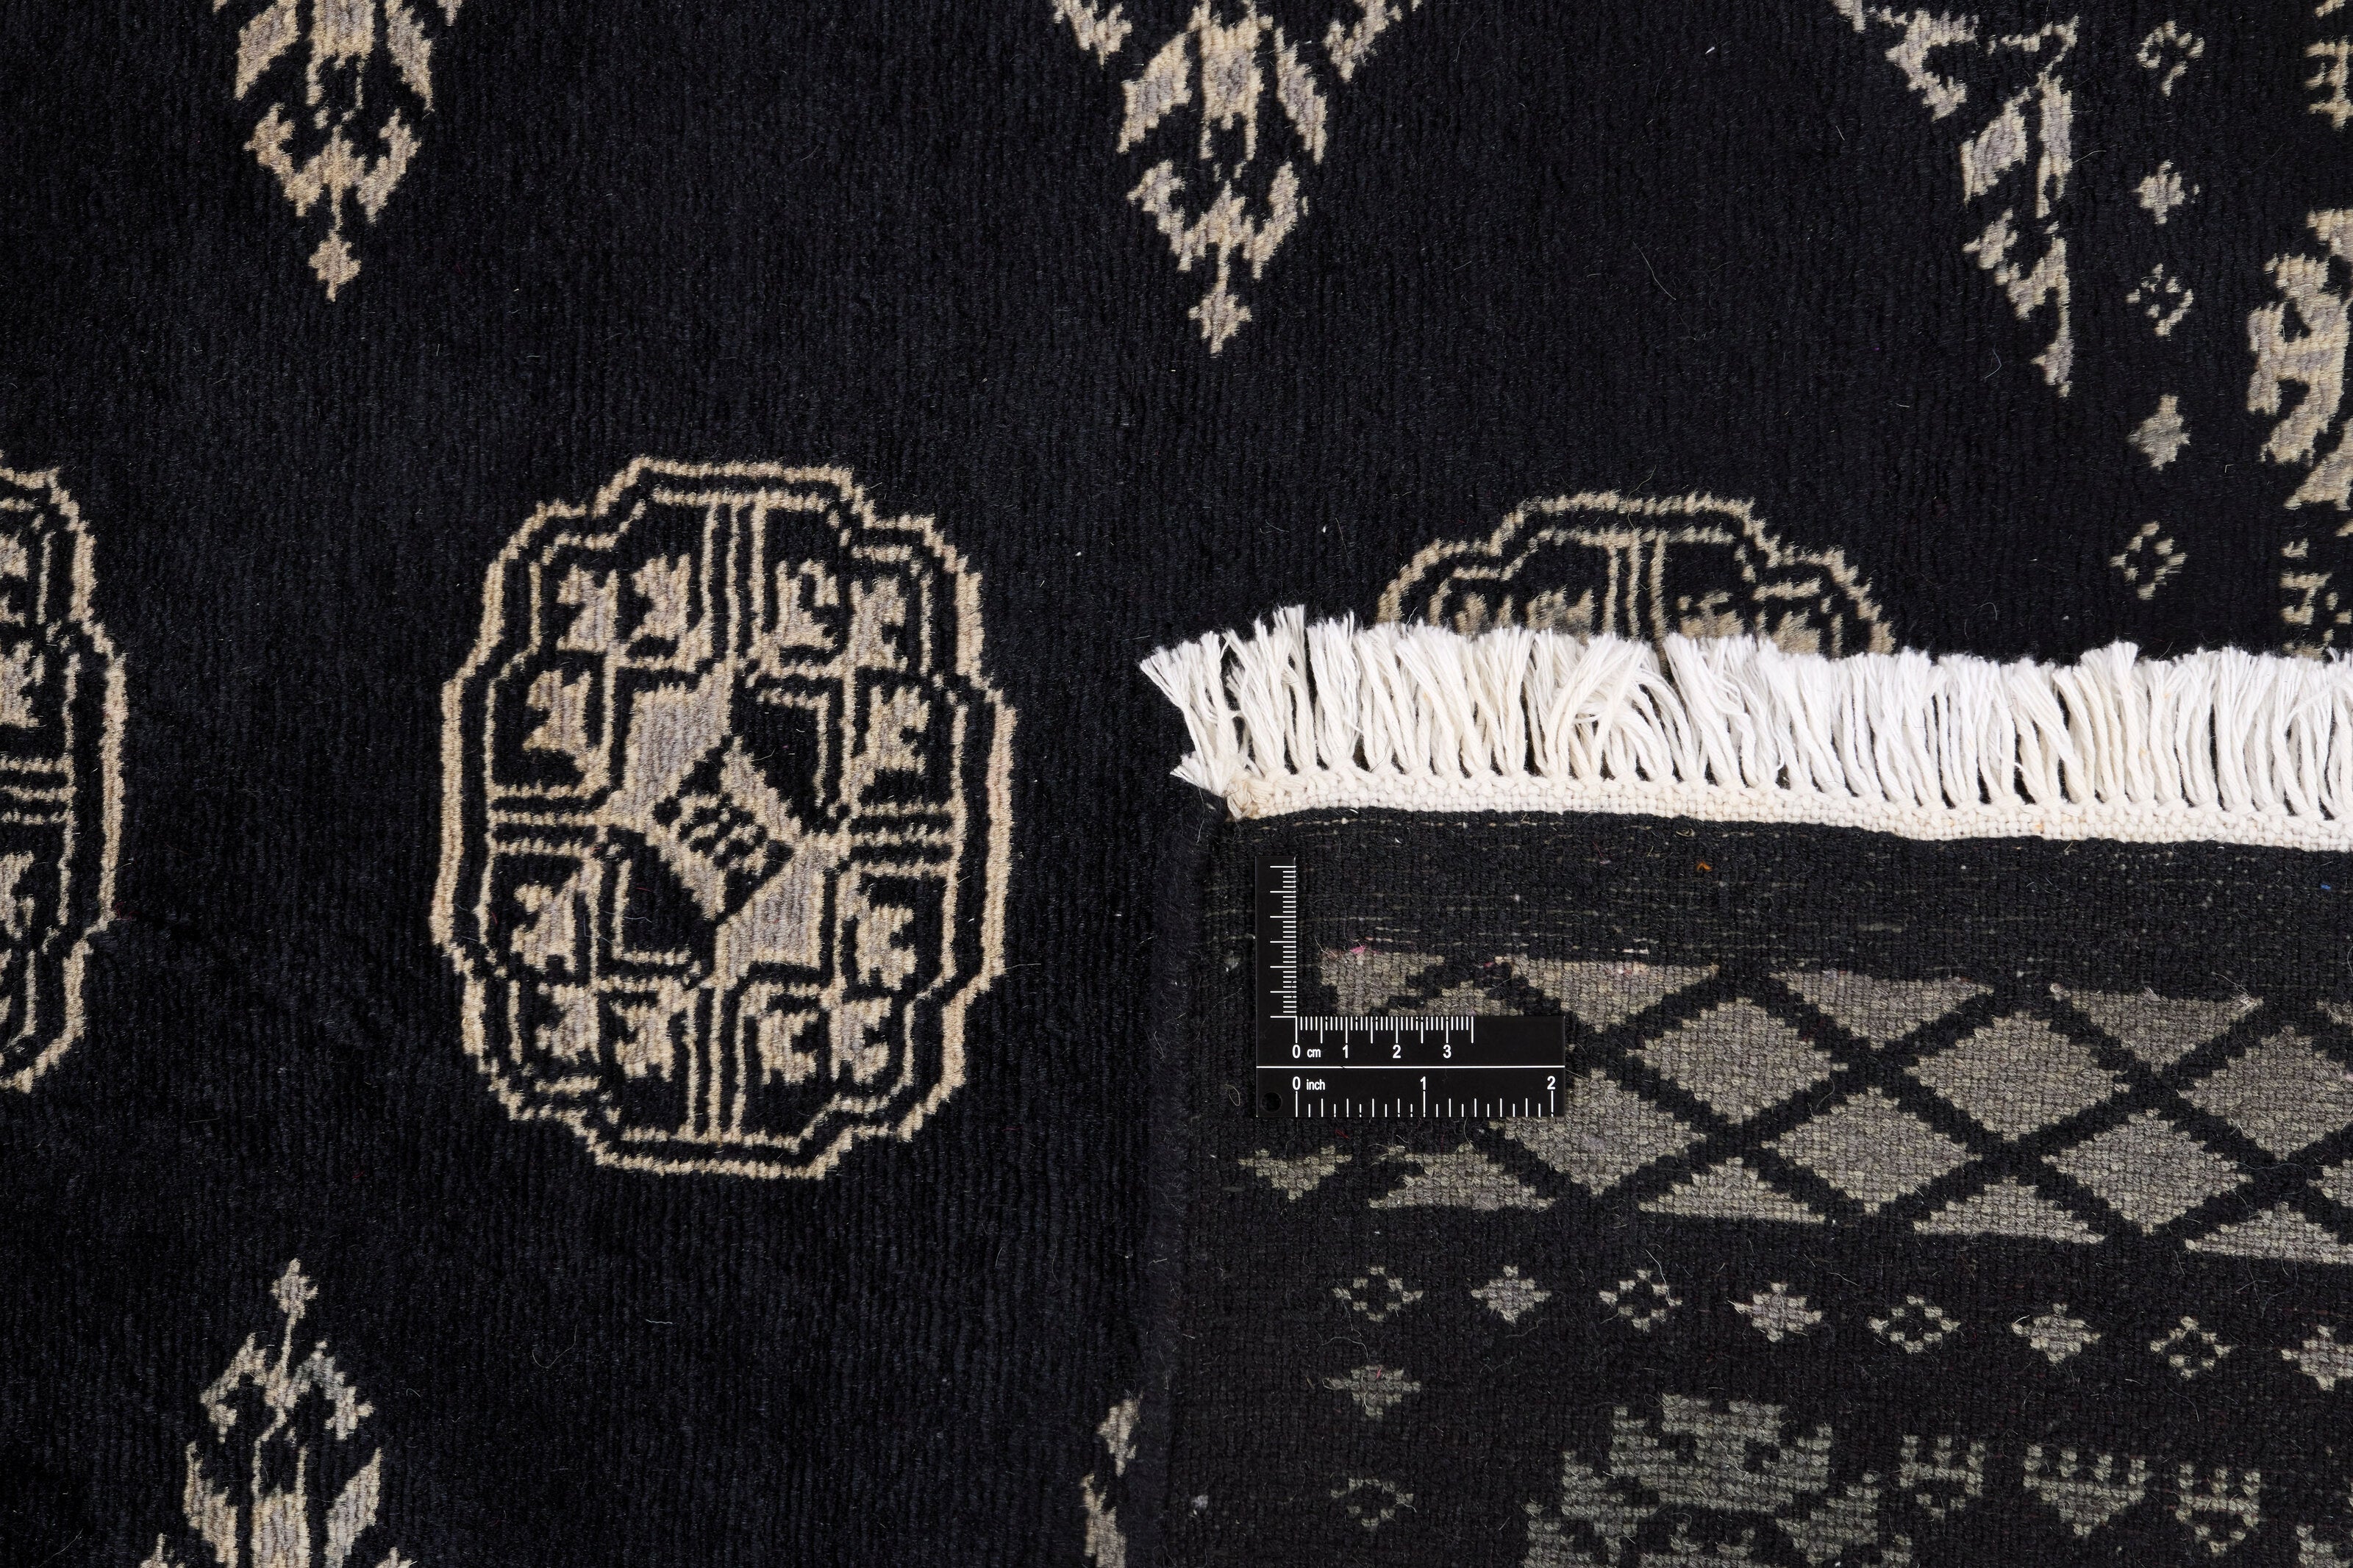 Black Oriental runner with traditional bordered pattern